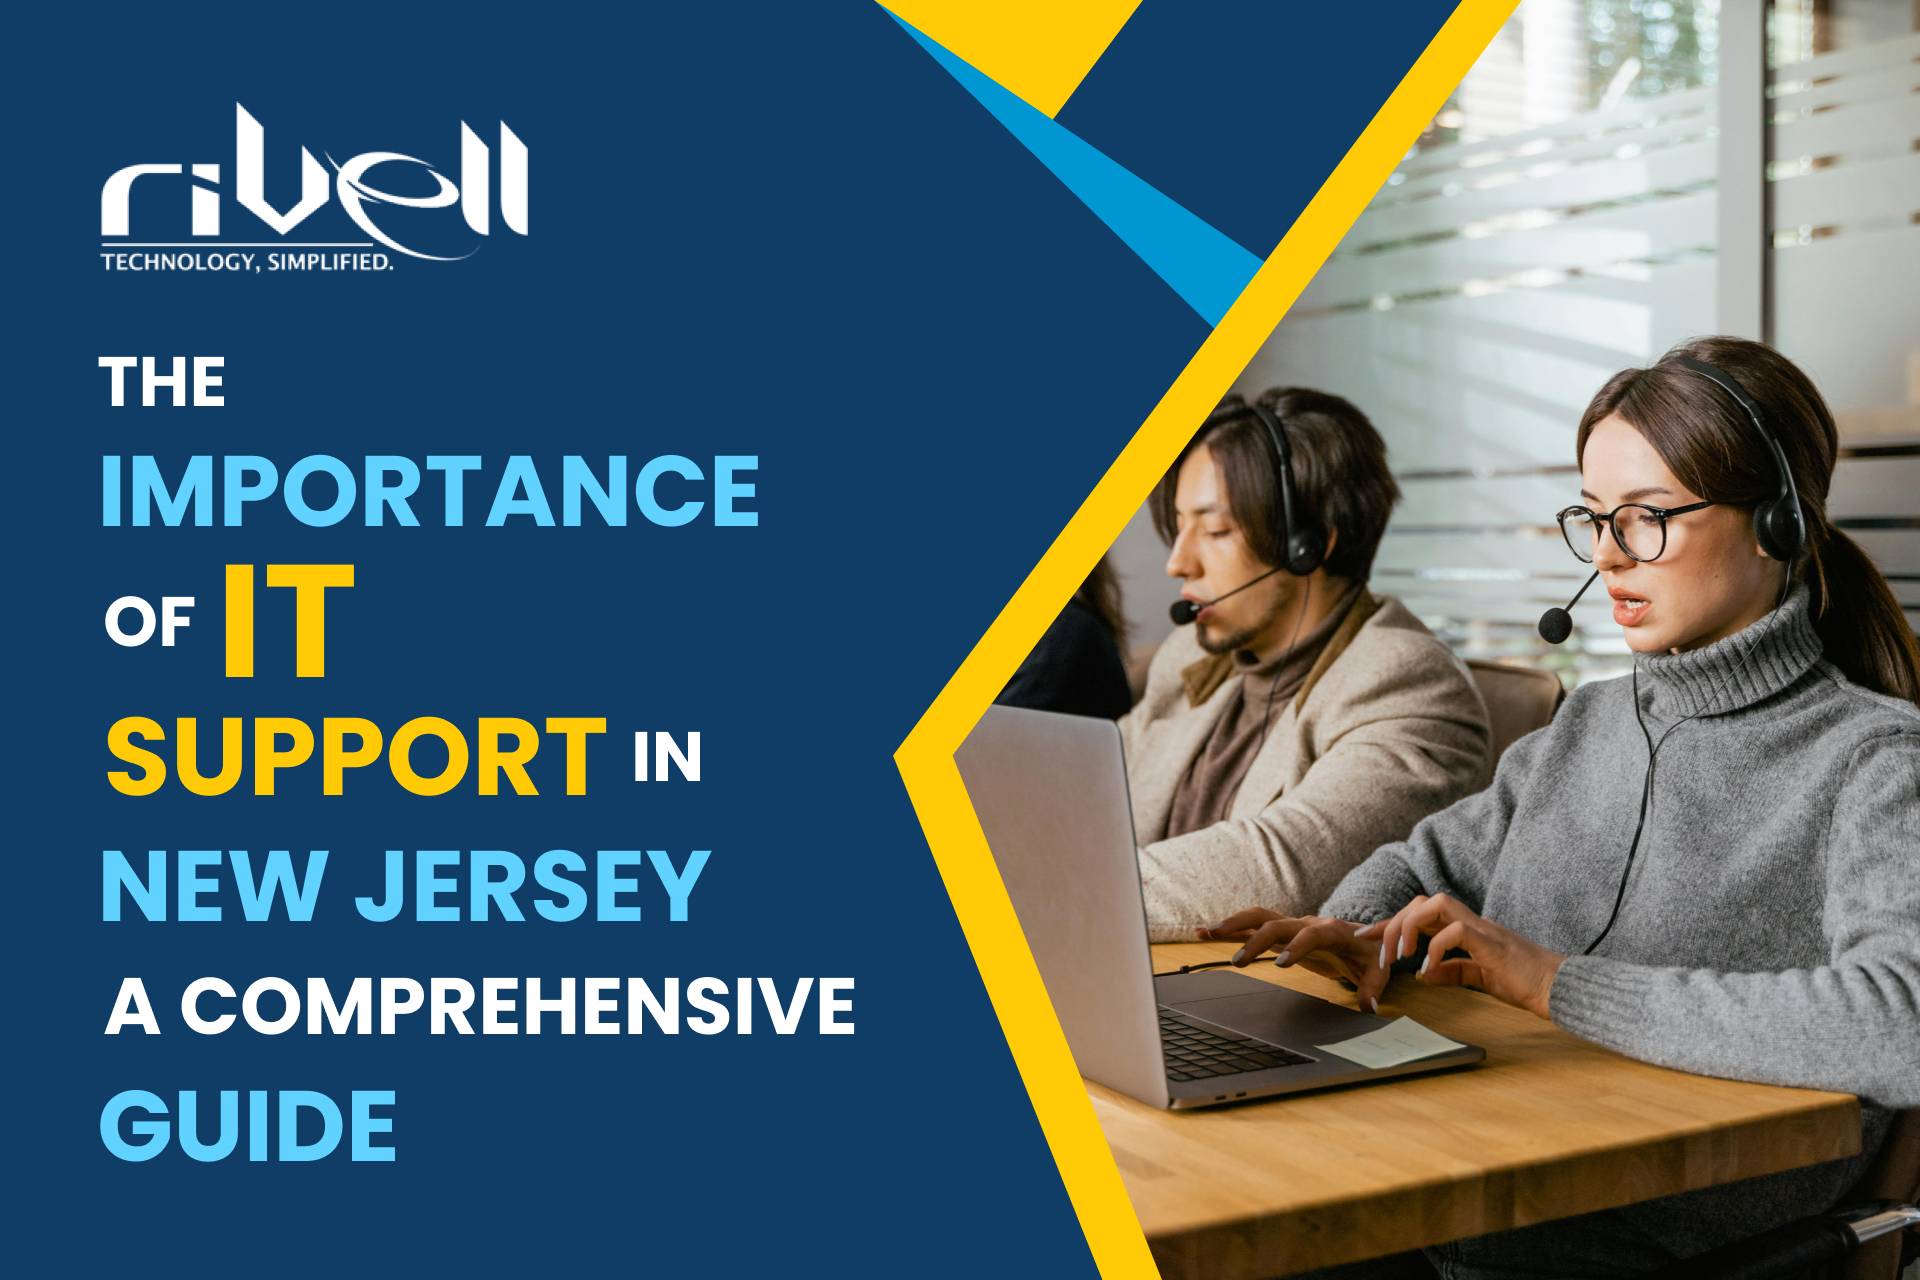 The Importance of IT Support in New Jersey A Comprehensive Guide